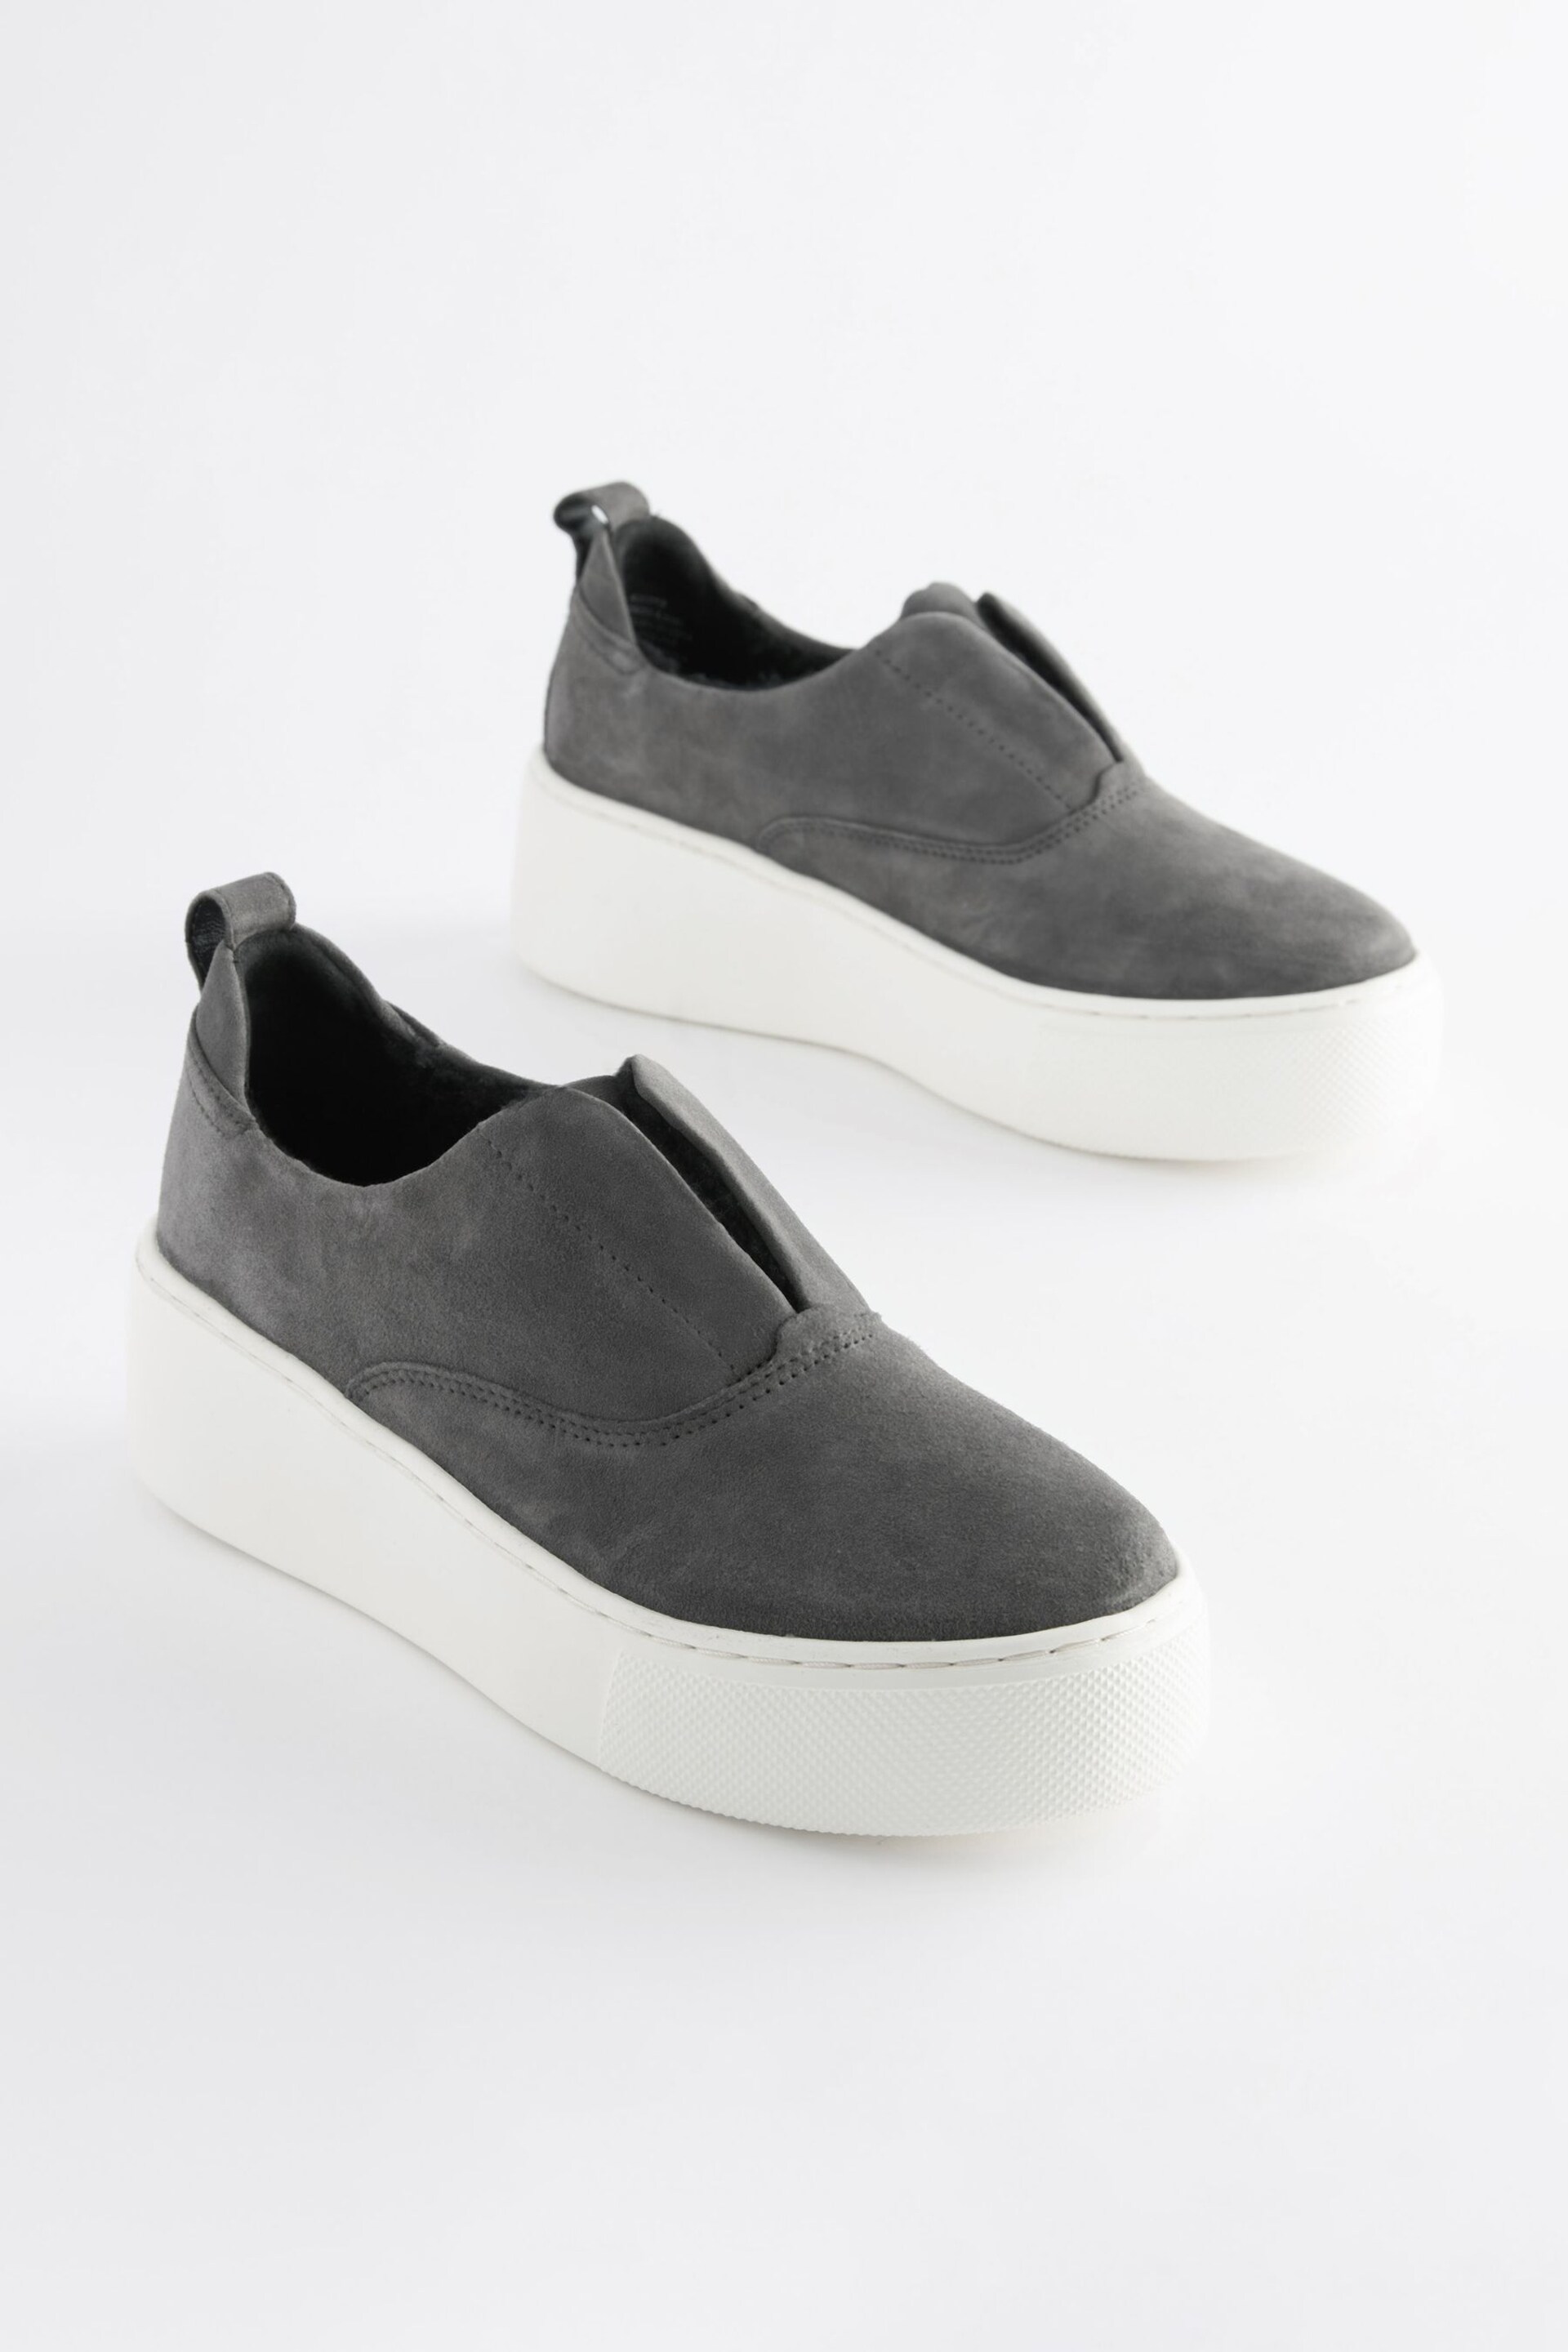 Grey Slip On Signature Forever Comfort® Leather Chunky Wedges Platform Trainers - Image 3 of 9